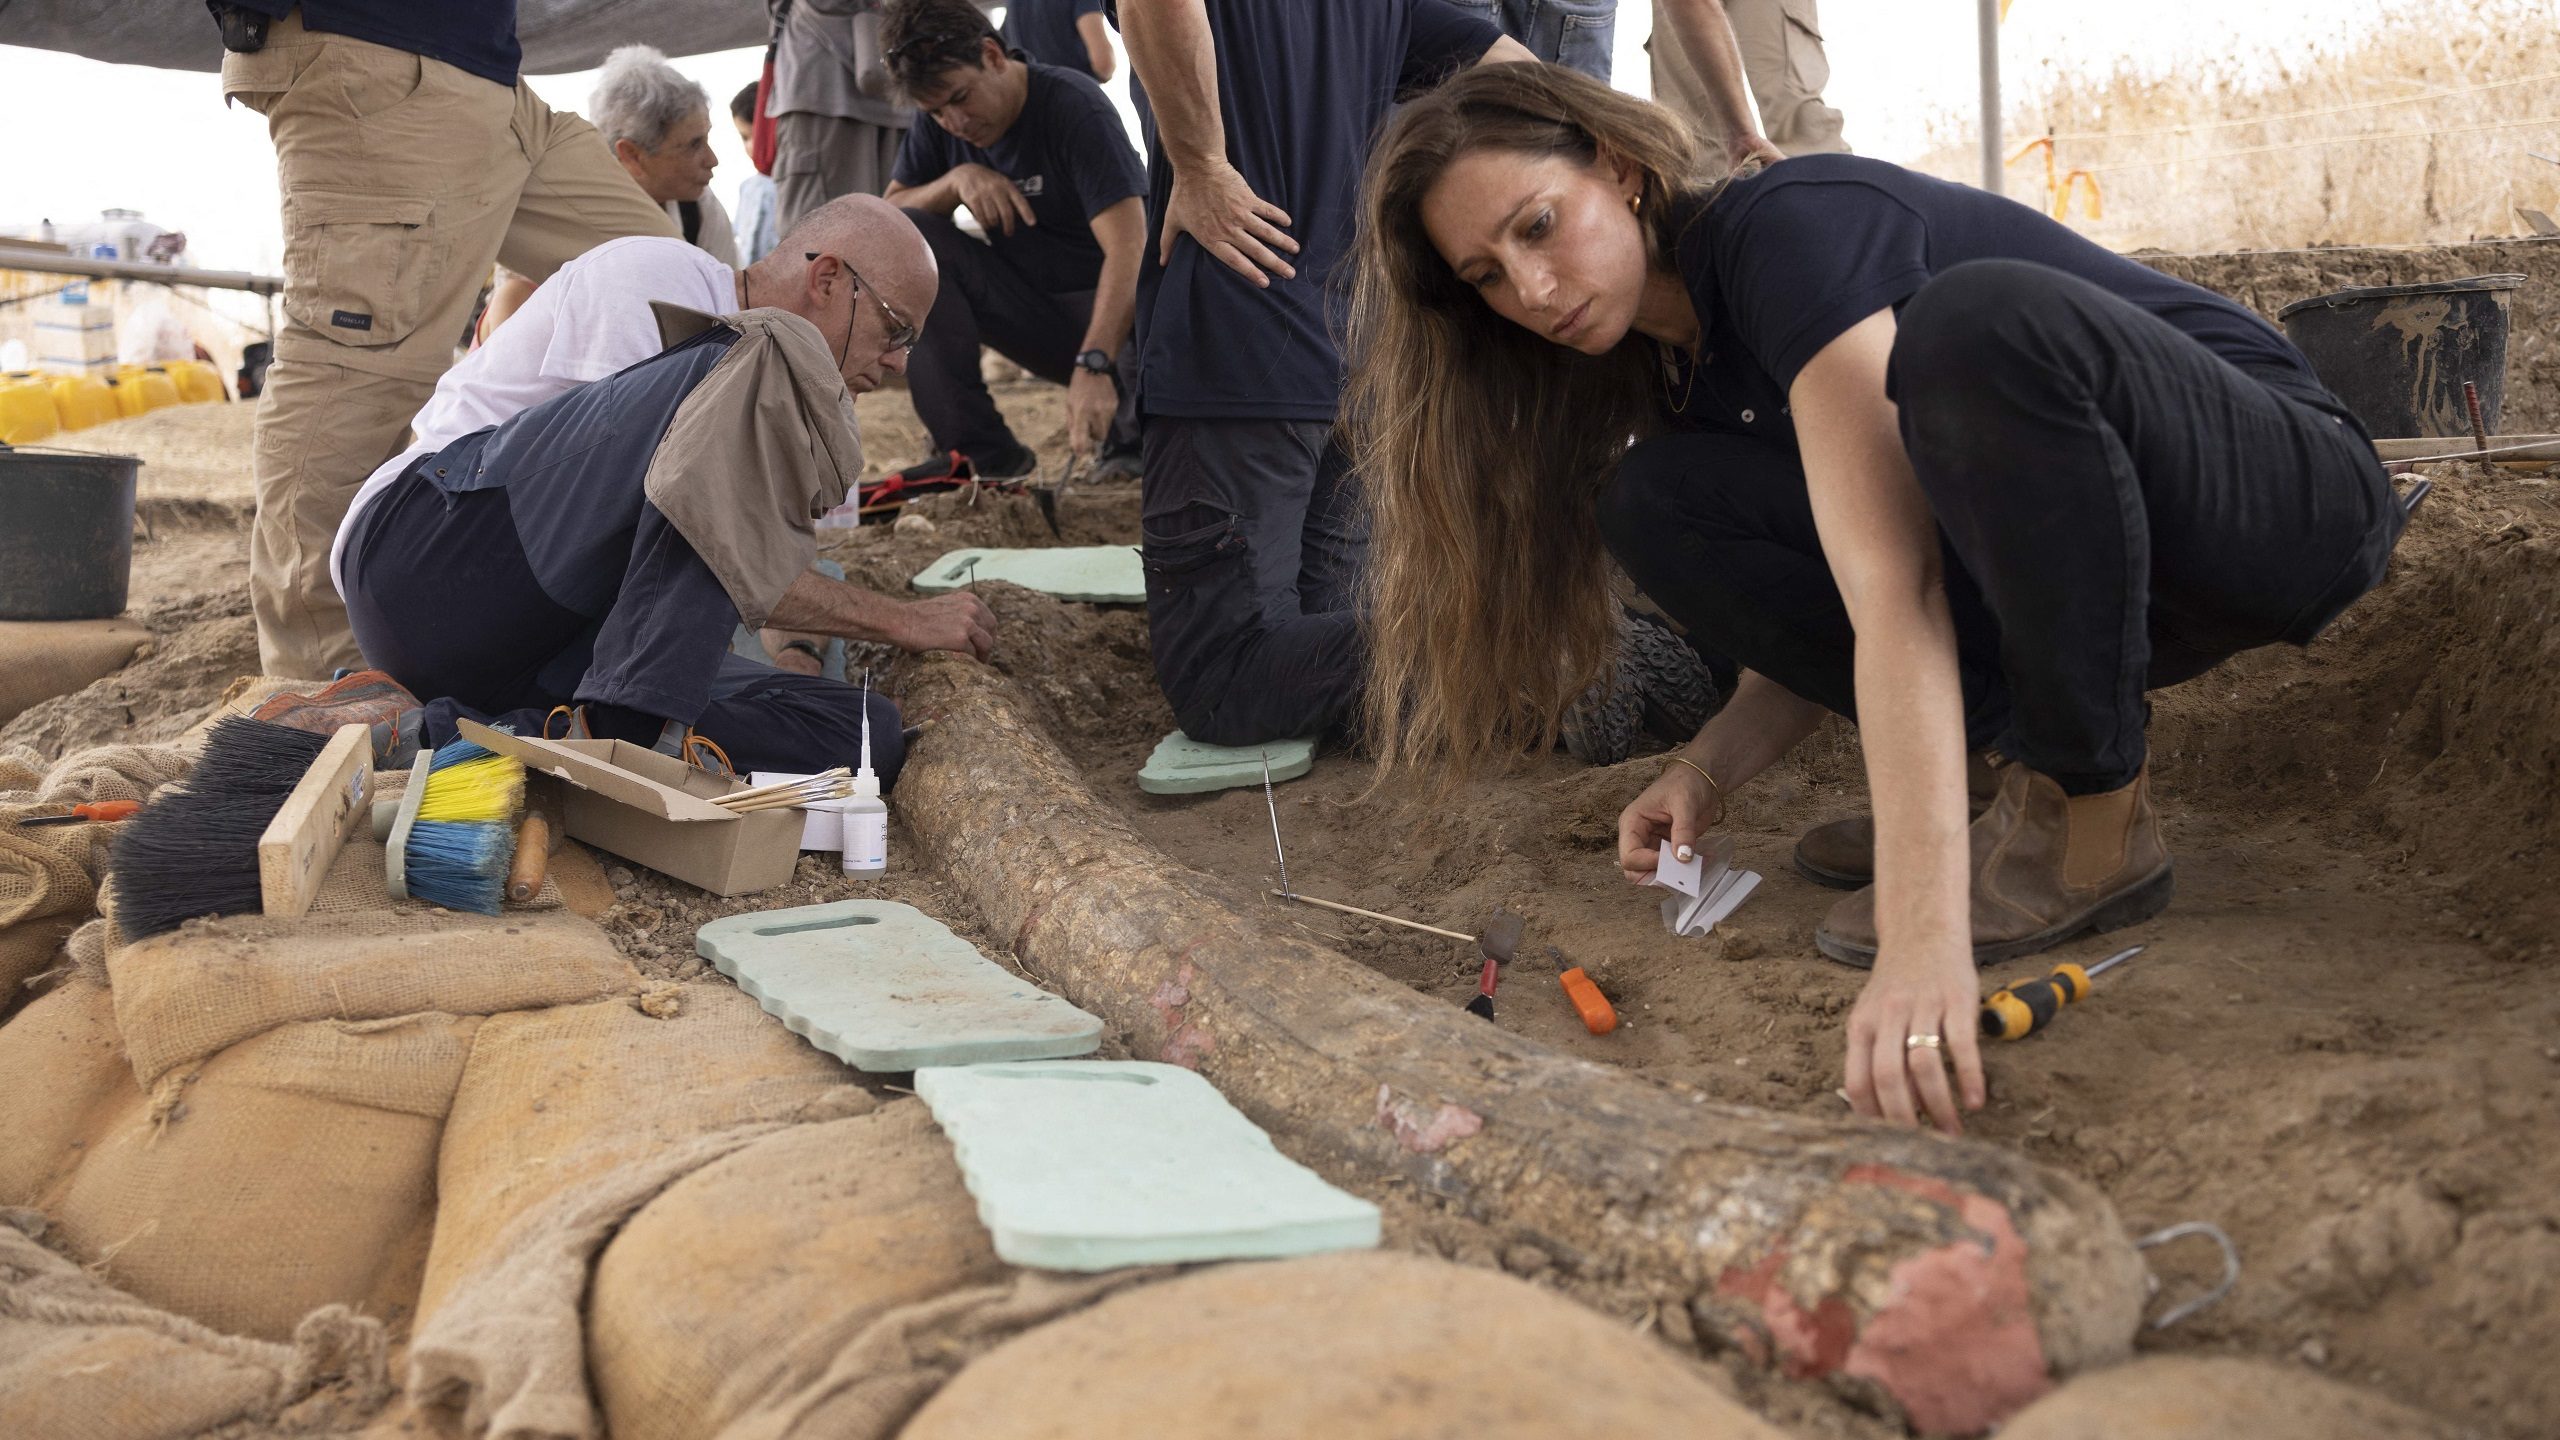 500,000-year-old Elephant Tusk Unearthed in Central Israel